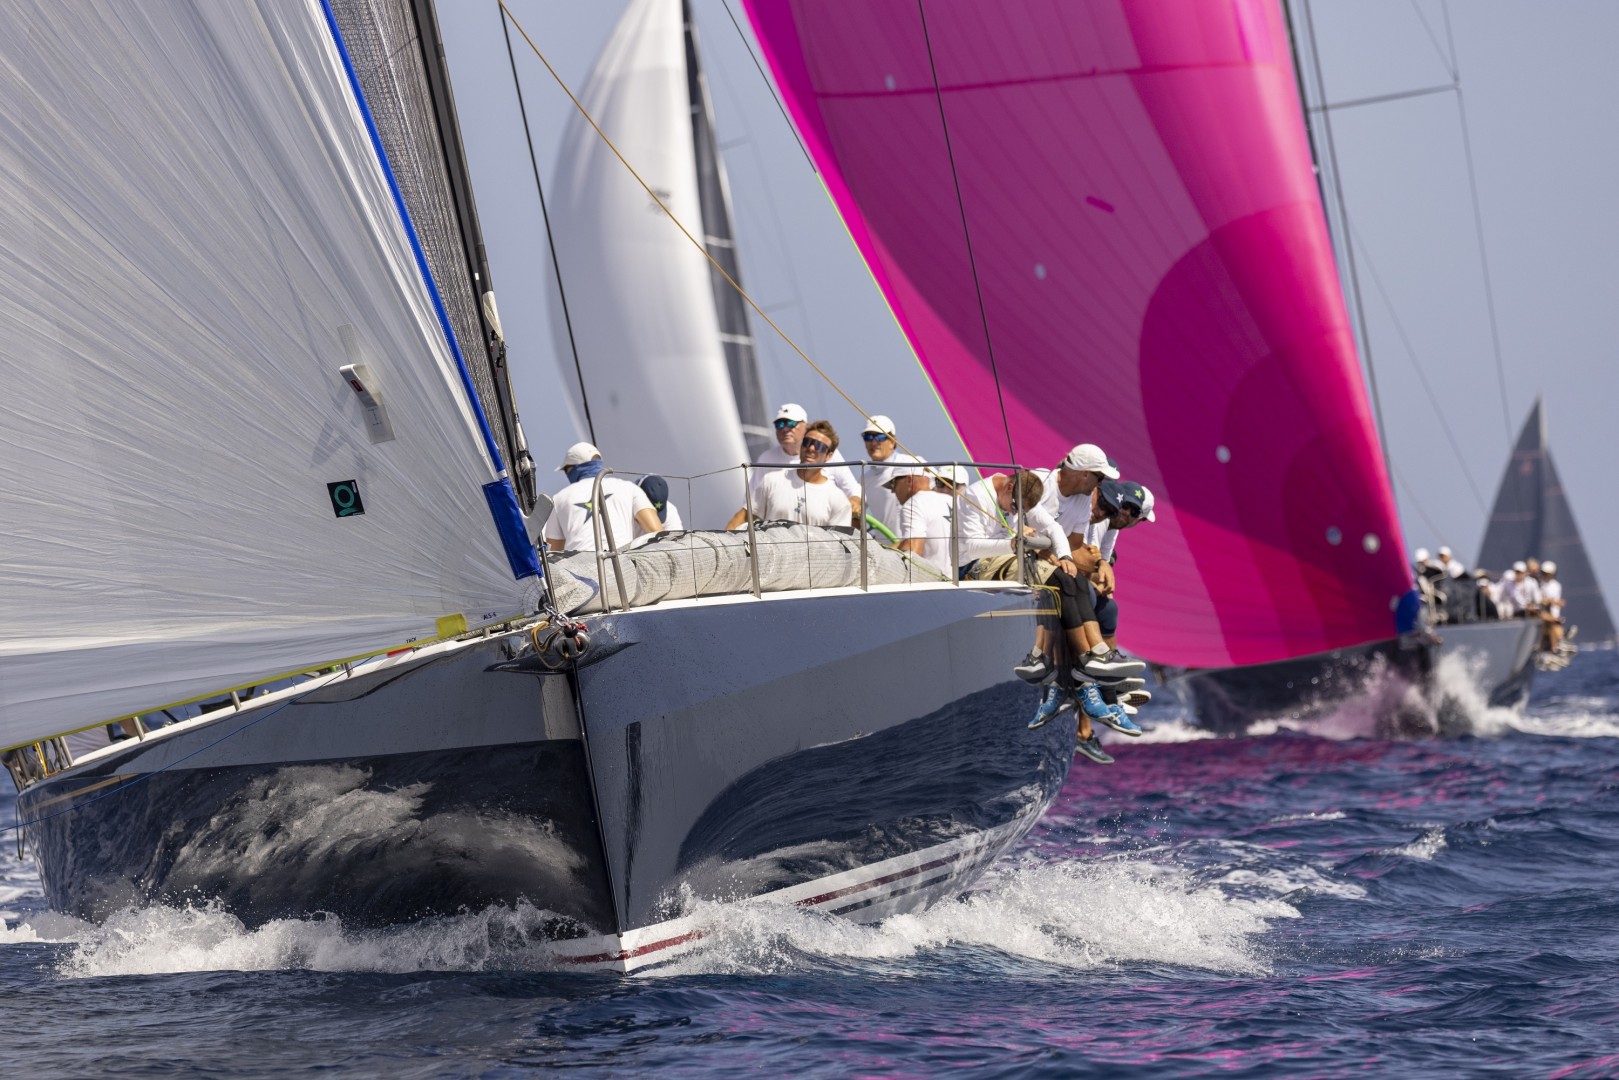 Hap Fauth's 74ft Bella Mente today scored her first bullet of this year's Maxi Yacht Rolex Cup